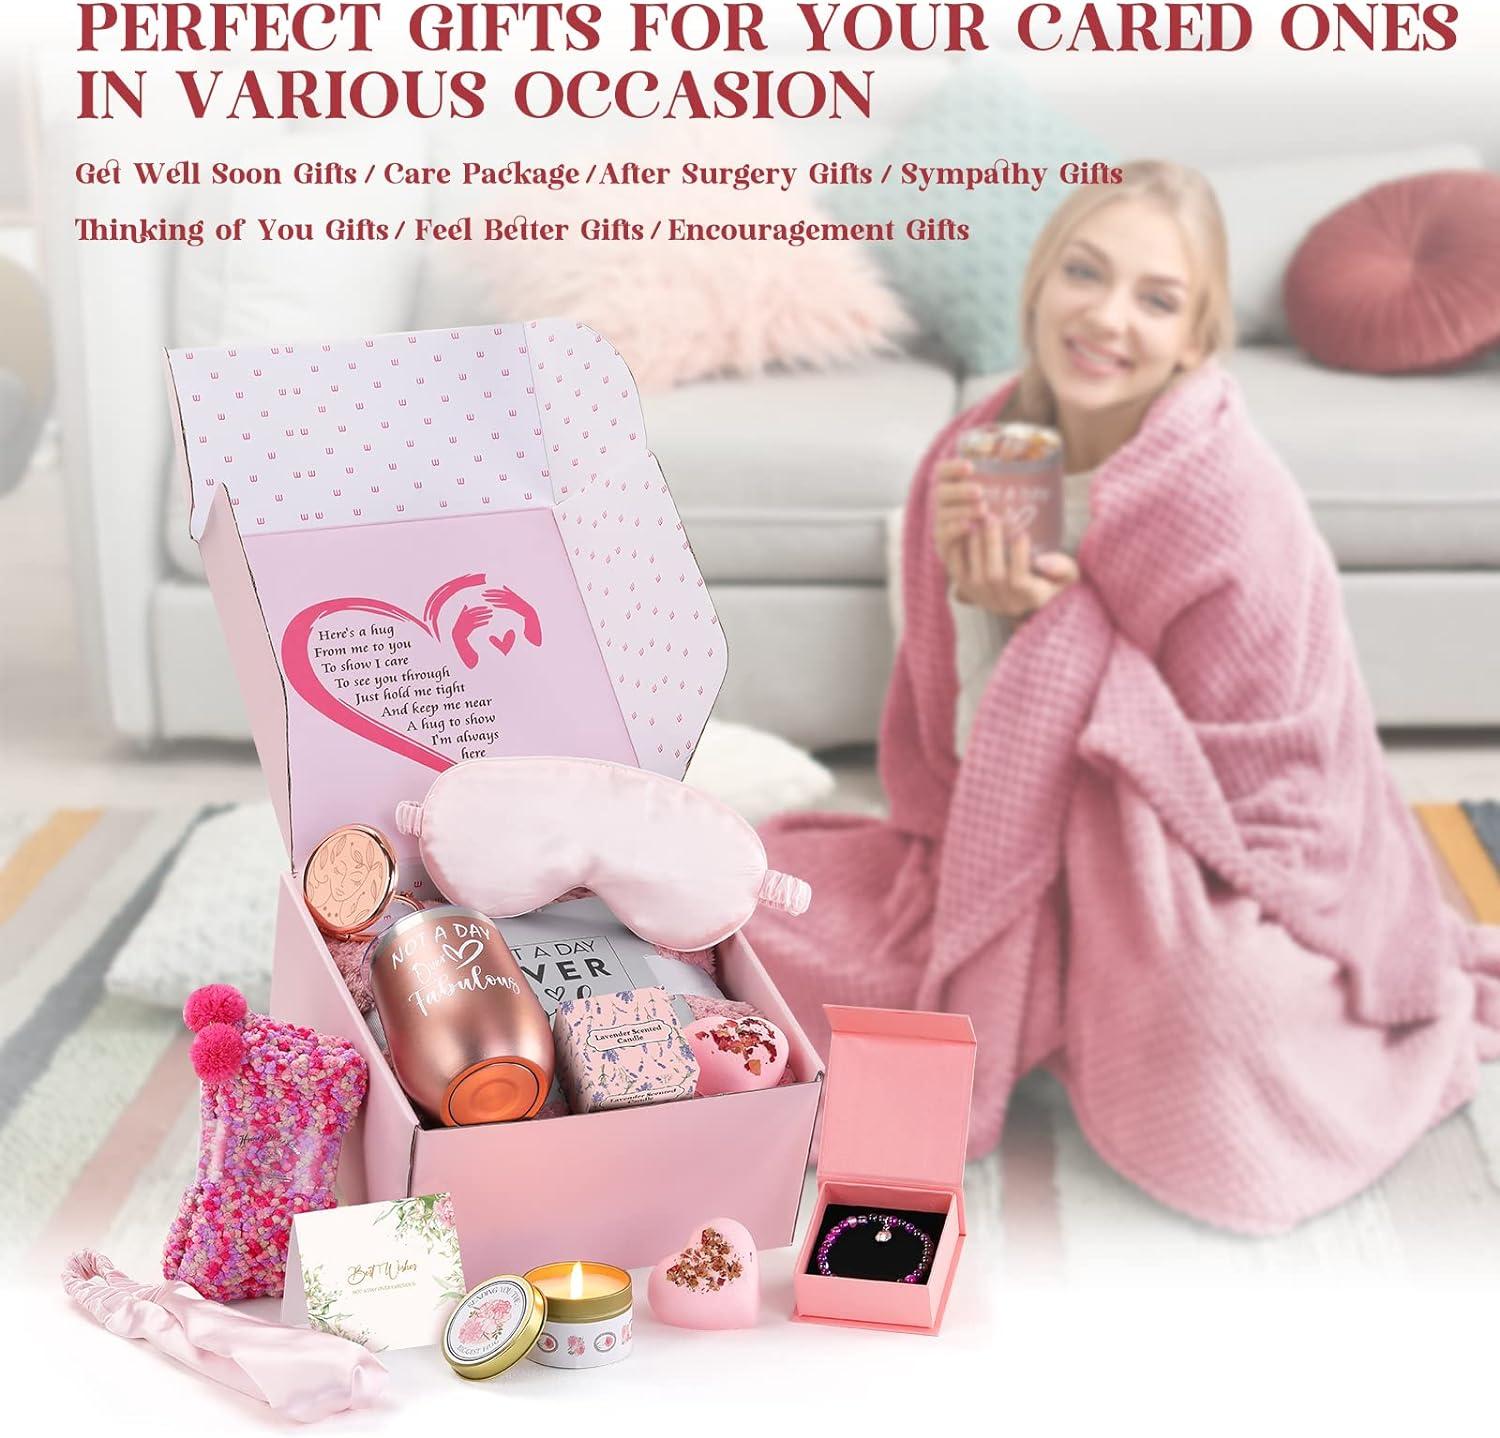 Get Well Soon Gifts for Women - Care Package for Women, Get Well Gifts for  Women after Surgery, Feel Better Gifts for Sick Friends, Cheer Up Gift